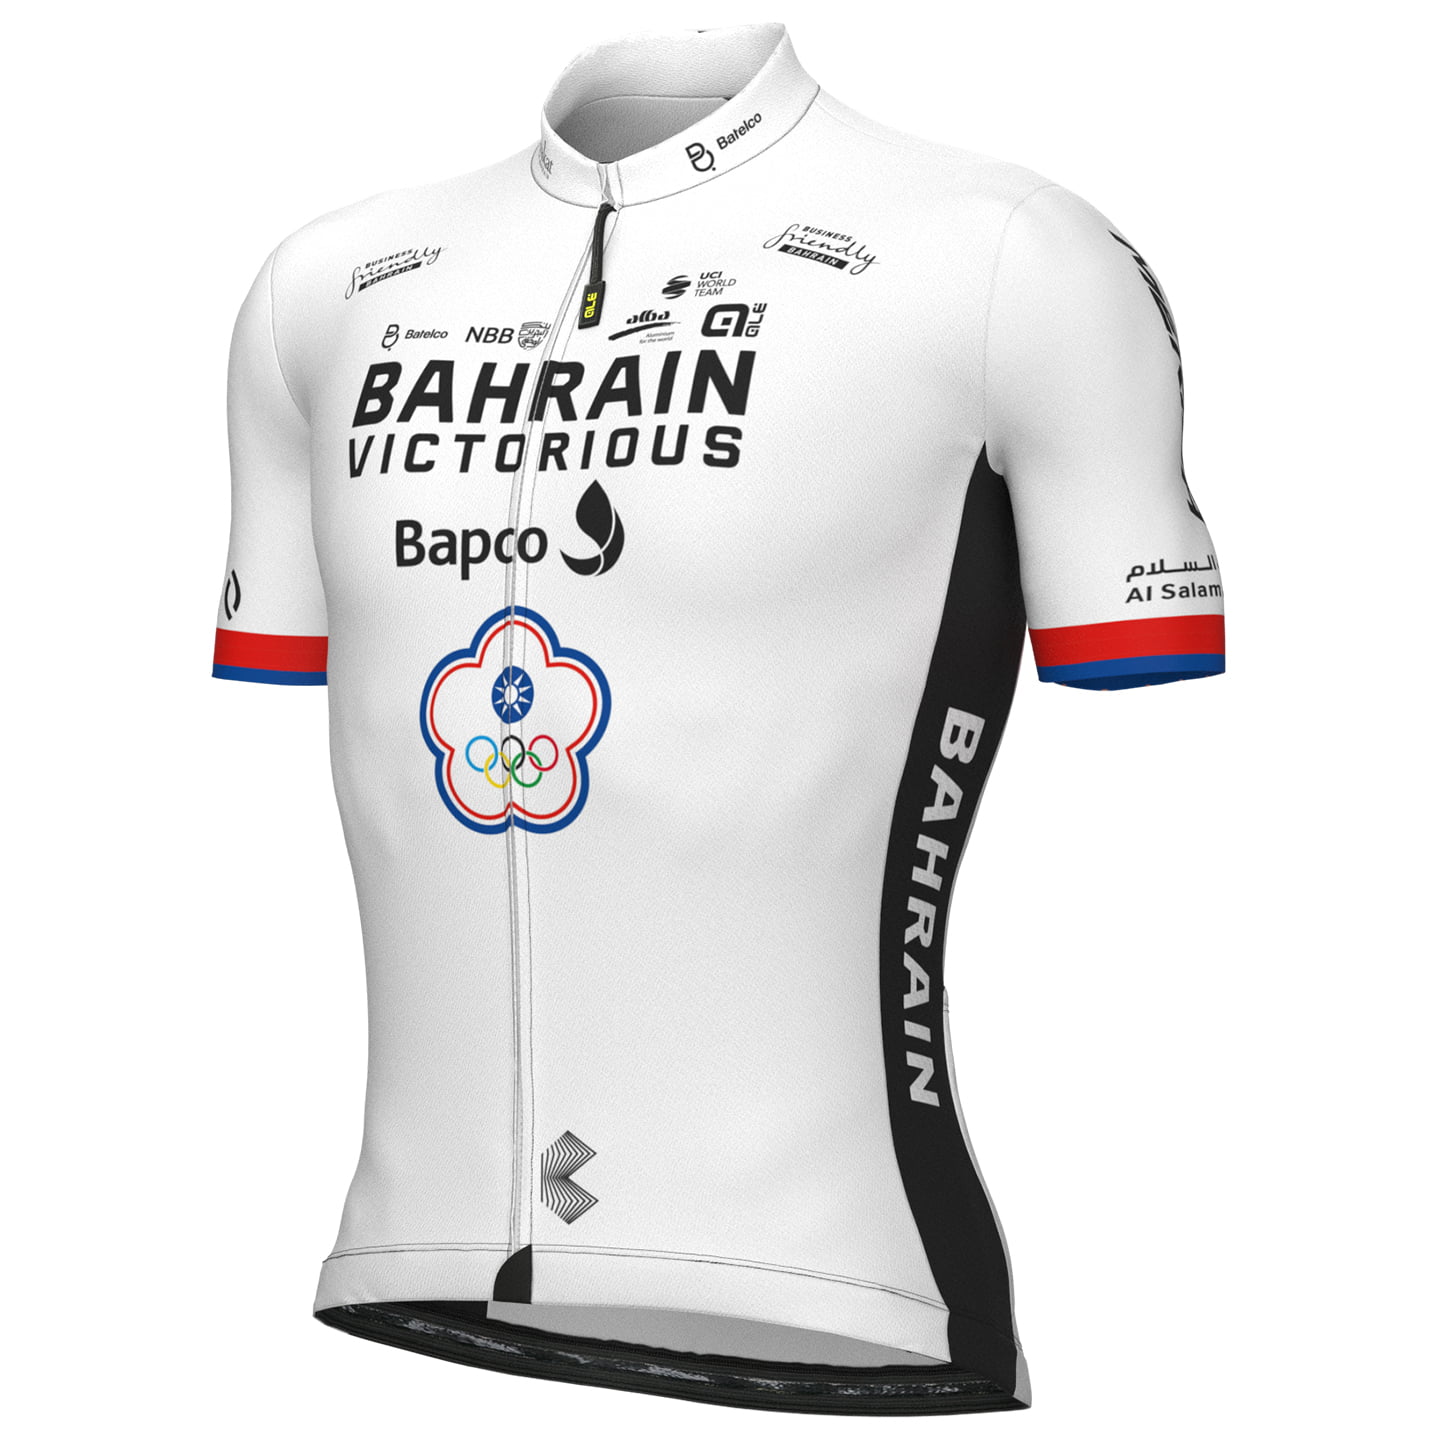 BAHRAIN - VICTORIOUS Short Sleeve Jersey Taiwanese Champion 2022, for men, size L, Cycling shirt, Cycle clothing